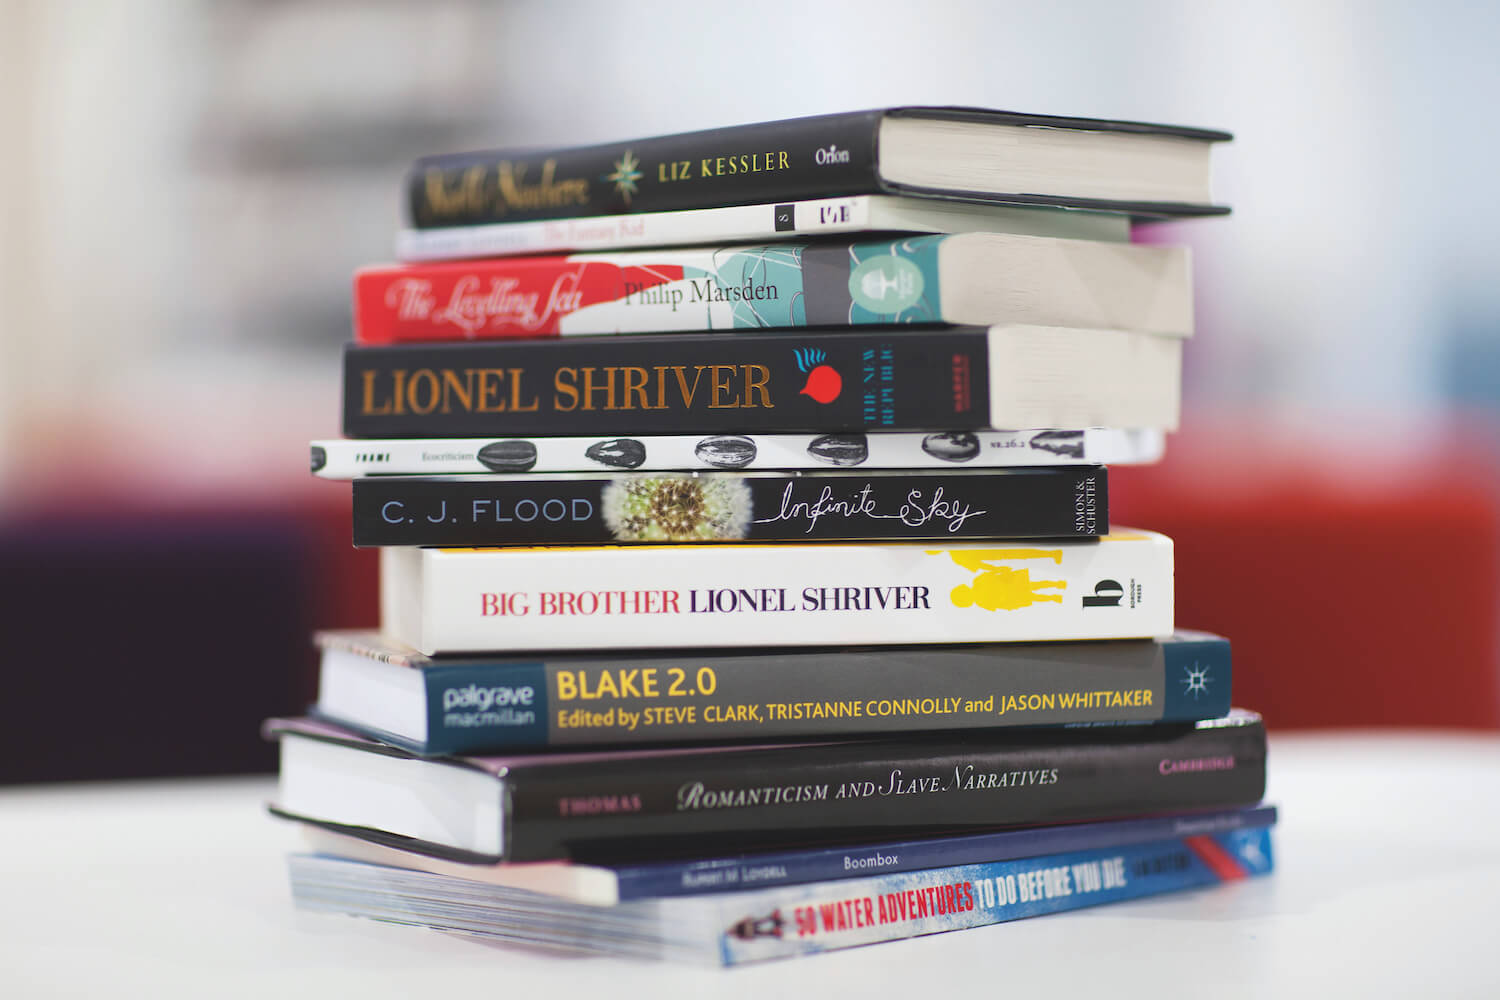 A stack of books piled up